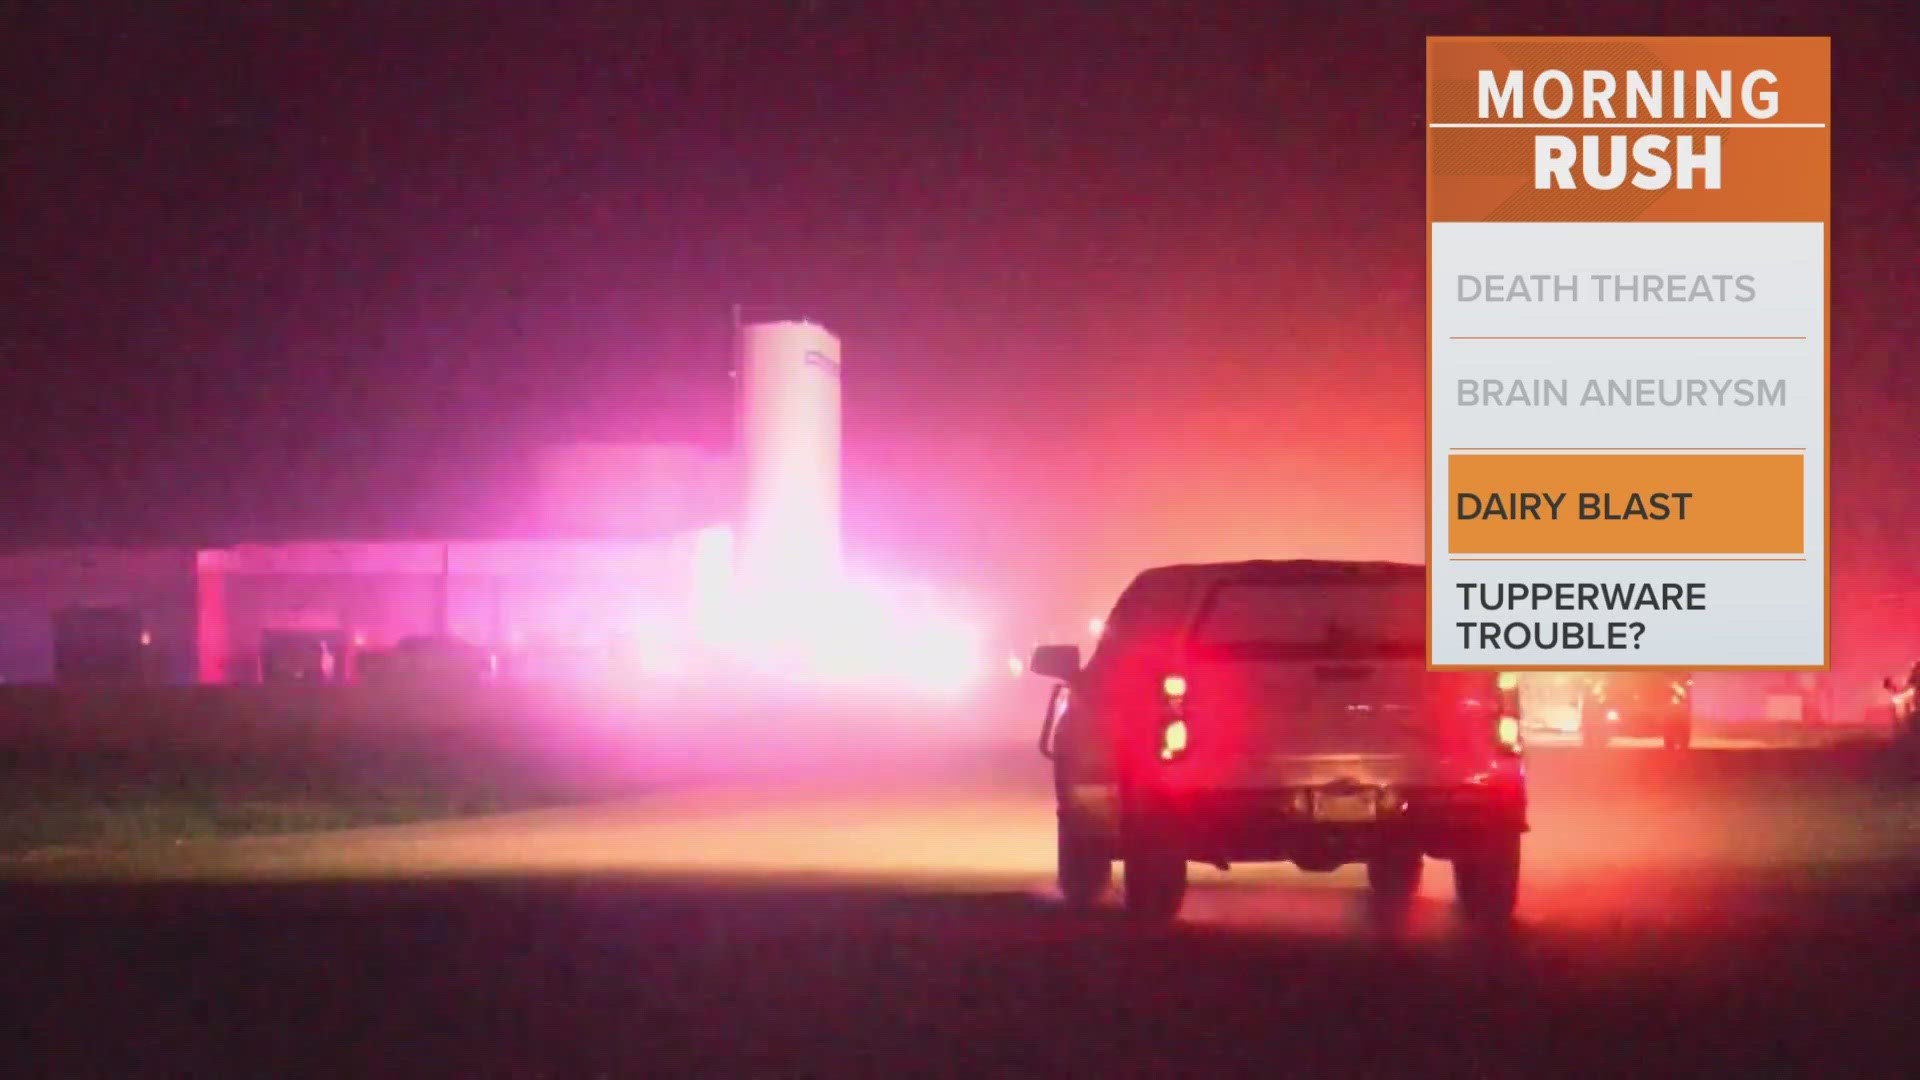 Authorities say one person was also critically injured. The farm is located about an hour from Amarillo, Texas.